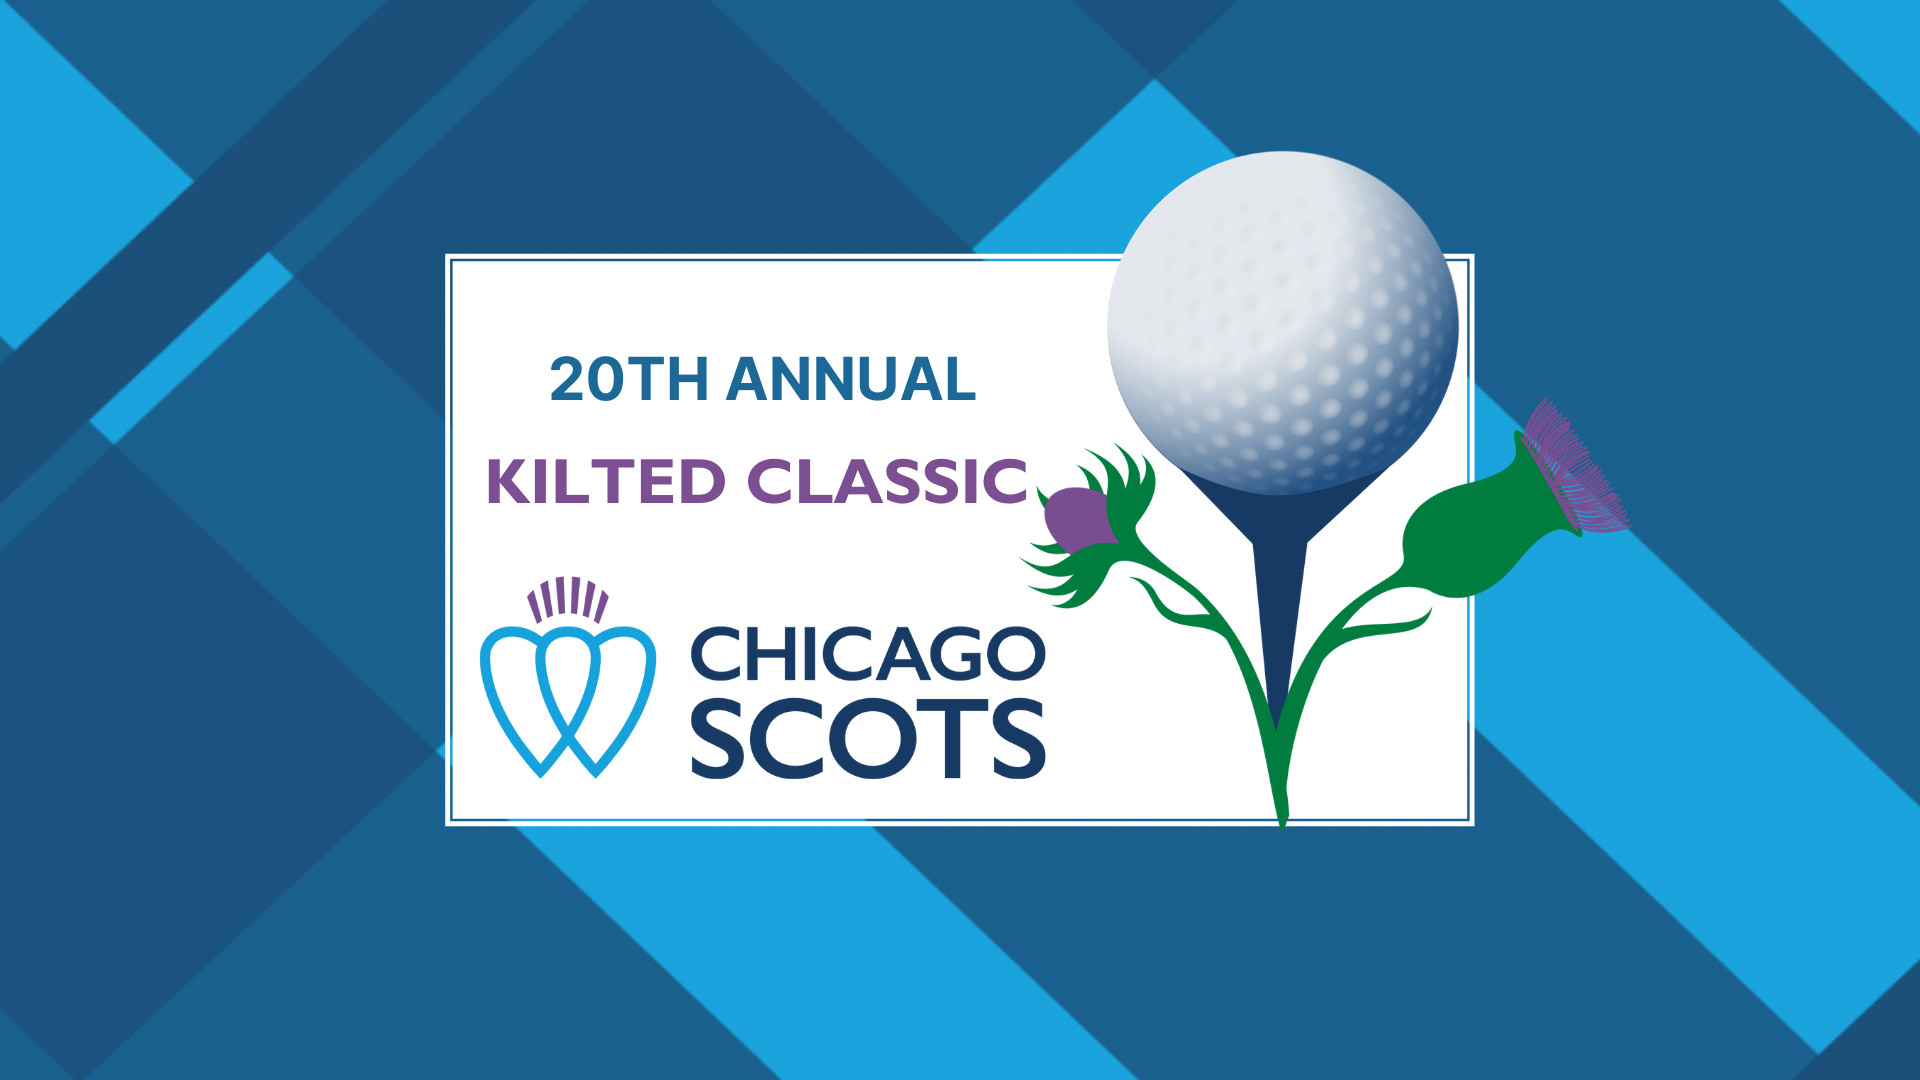 20th Annual Kilted Classic Golf Tournament